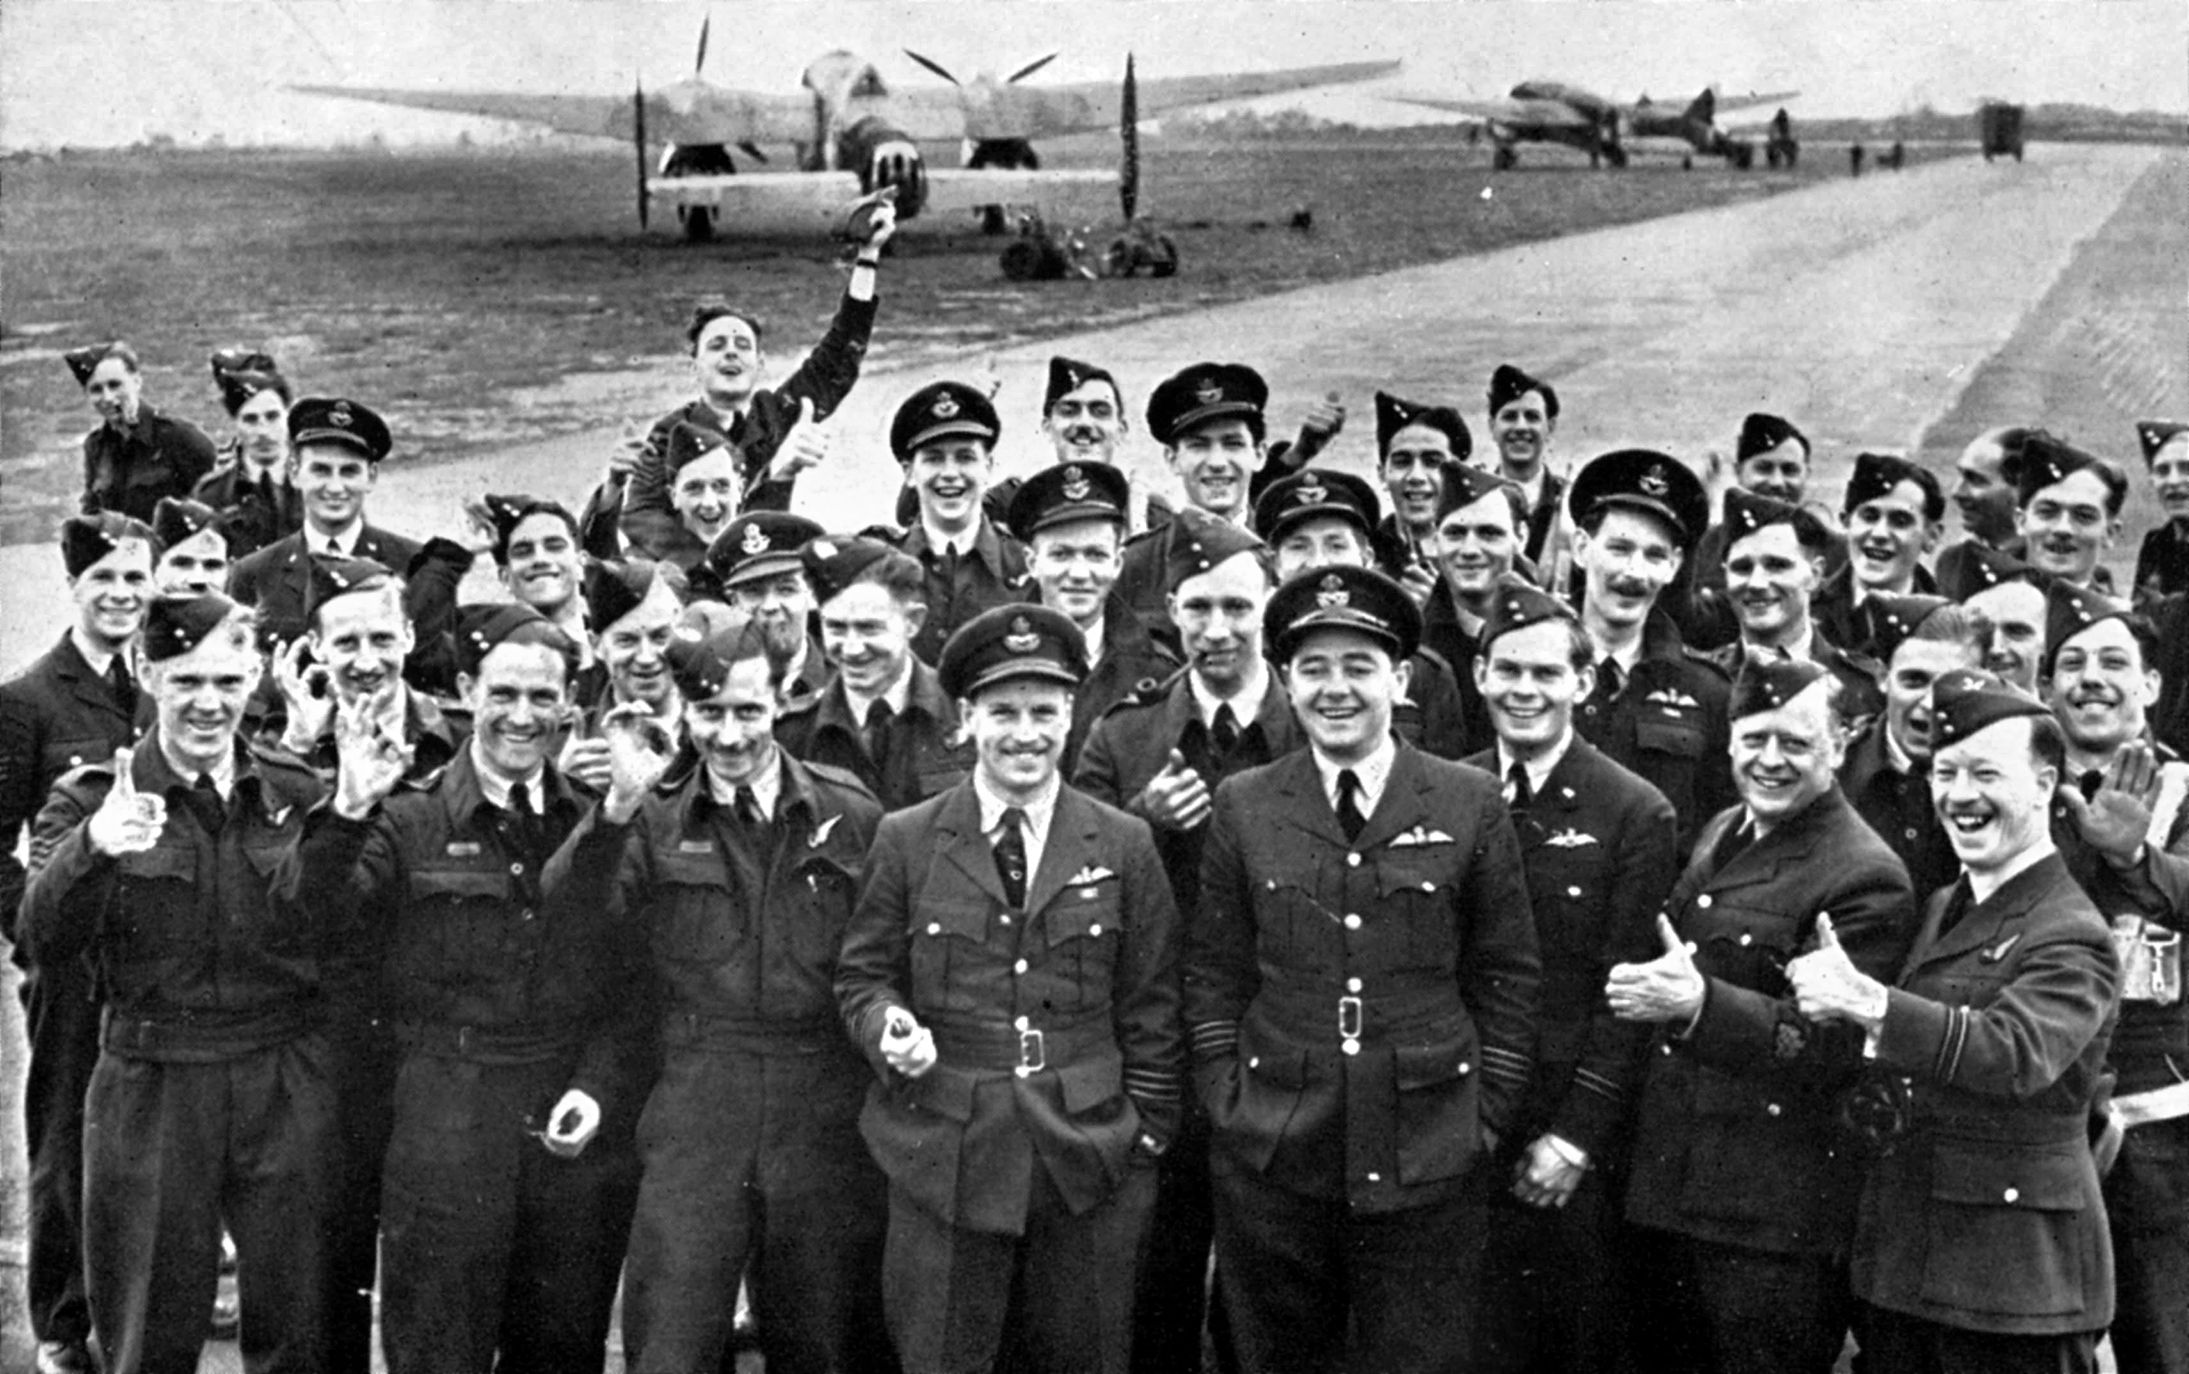 Their Avro Manchester bombers parked in the background at RAF Coningsby, Lincolnshire, and soon to be replaced by the hefty Lancaster, members of No. 106 Squadron RAF celebrate their return from the 1,000-plane raid against Cologne. Among those pictured is the squadron commander, Wing Commander Guy Gibson, standing in the center of the front row. Gibson later gained fame and received the Victoria Cross for leading No. 617 Squadron in the famed "Dambuster" raid a year later. He was killed in action in 1944.